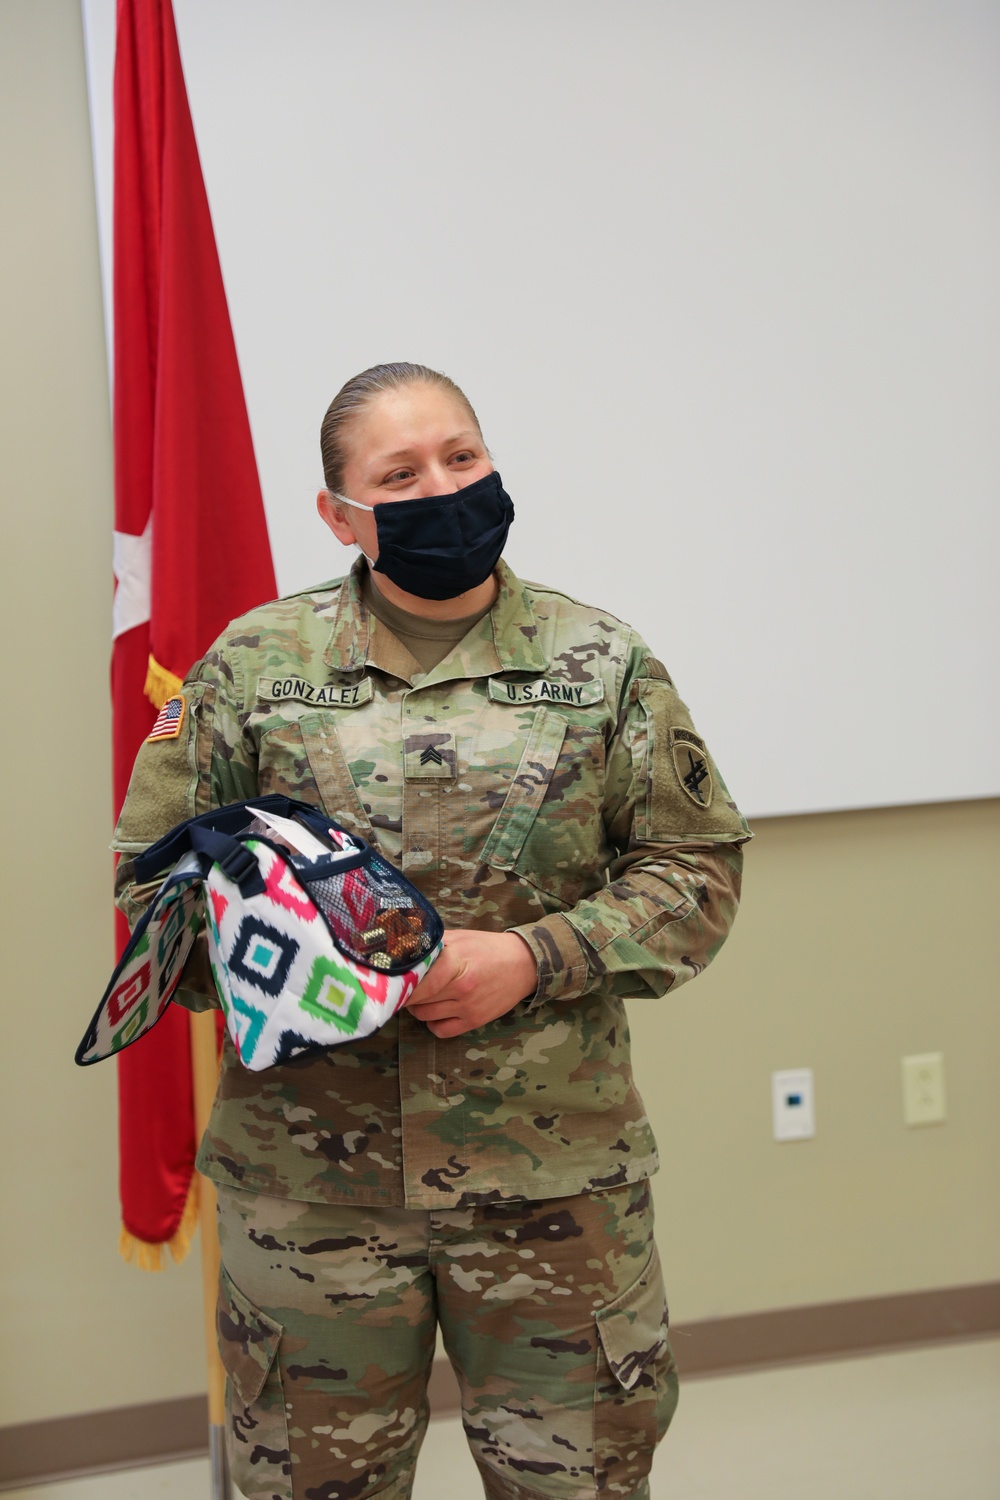 Women’s History month comes to USACAPOC (A) Headquarters